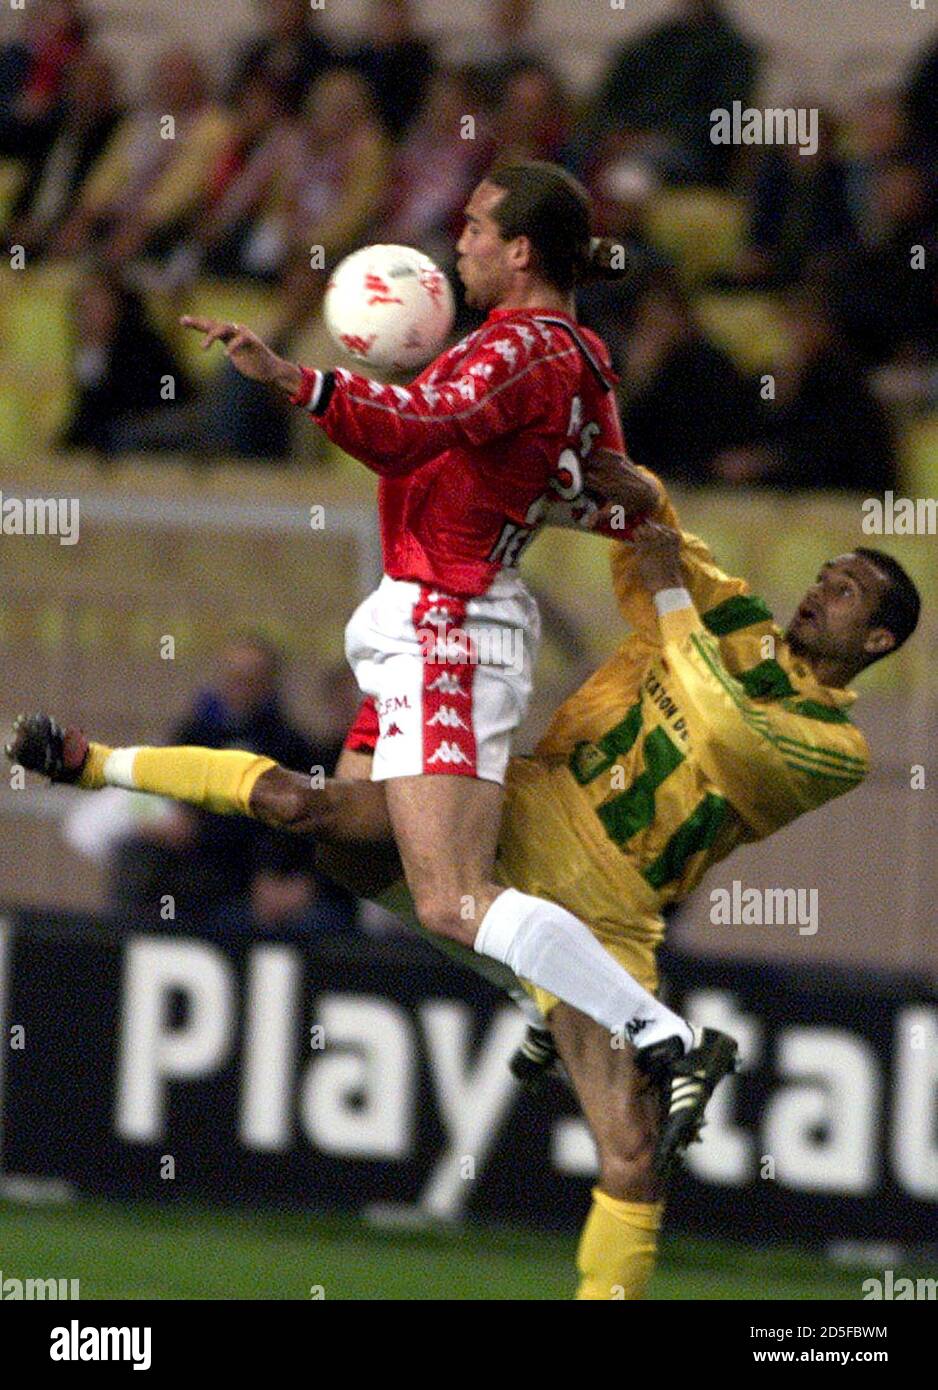 Dado Prso of Monaco (L) fights for the control of the ball with Nantes  defender Pascal Delhommeau during the French league soccer match between  Monaco and Nantes in Monaco March 26. EG//ME